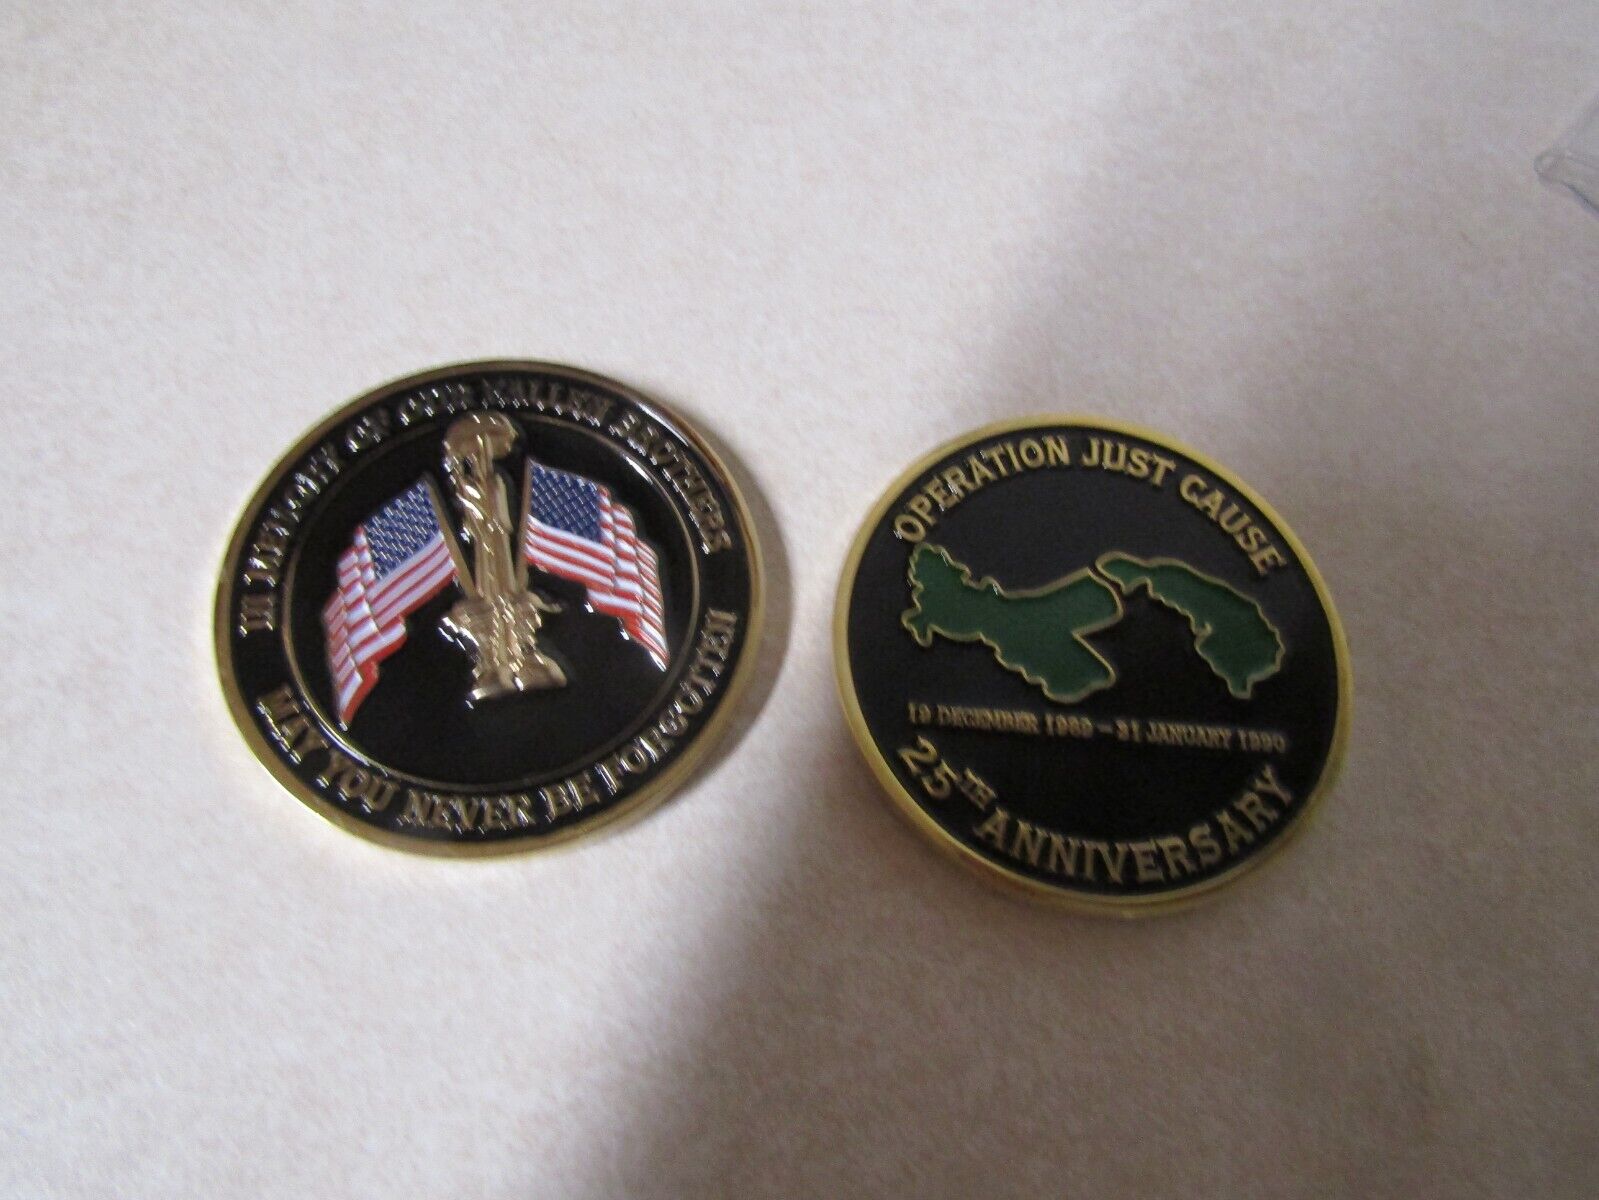 CHALLENGE COIN RARE OPERATION JUST CAUSE 25TH ANNIVERSARY MEMORY OF FALLEN BROS